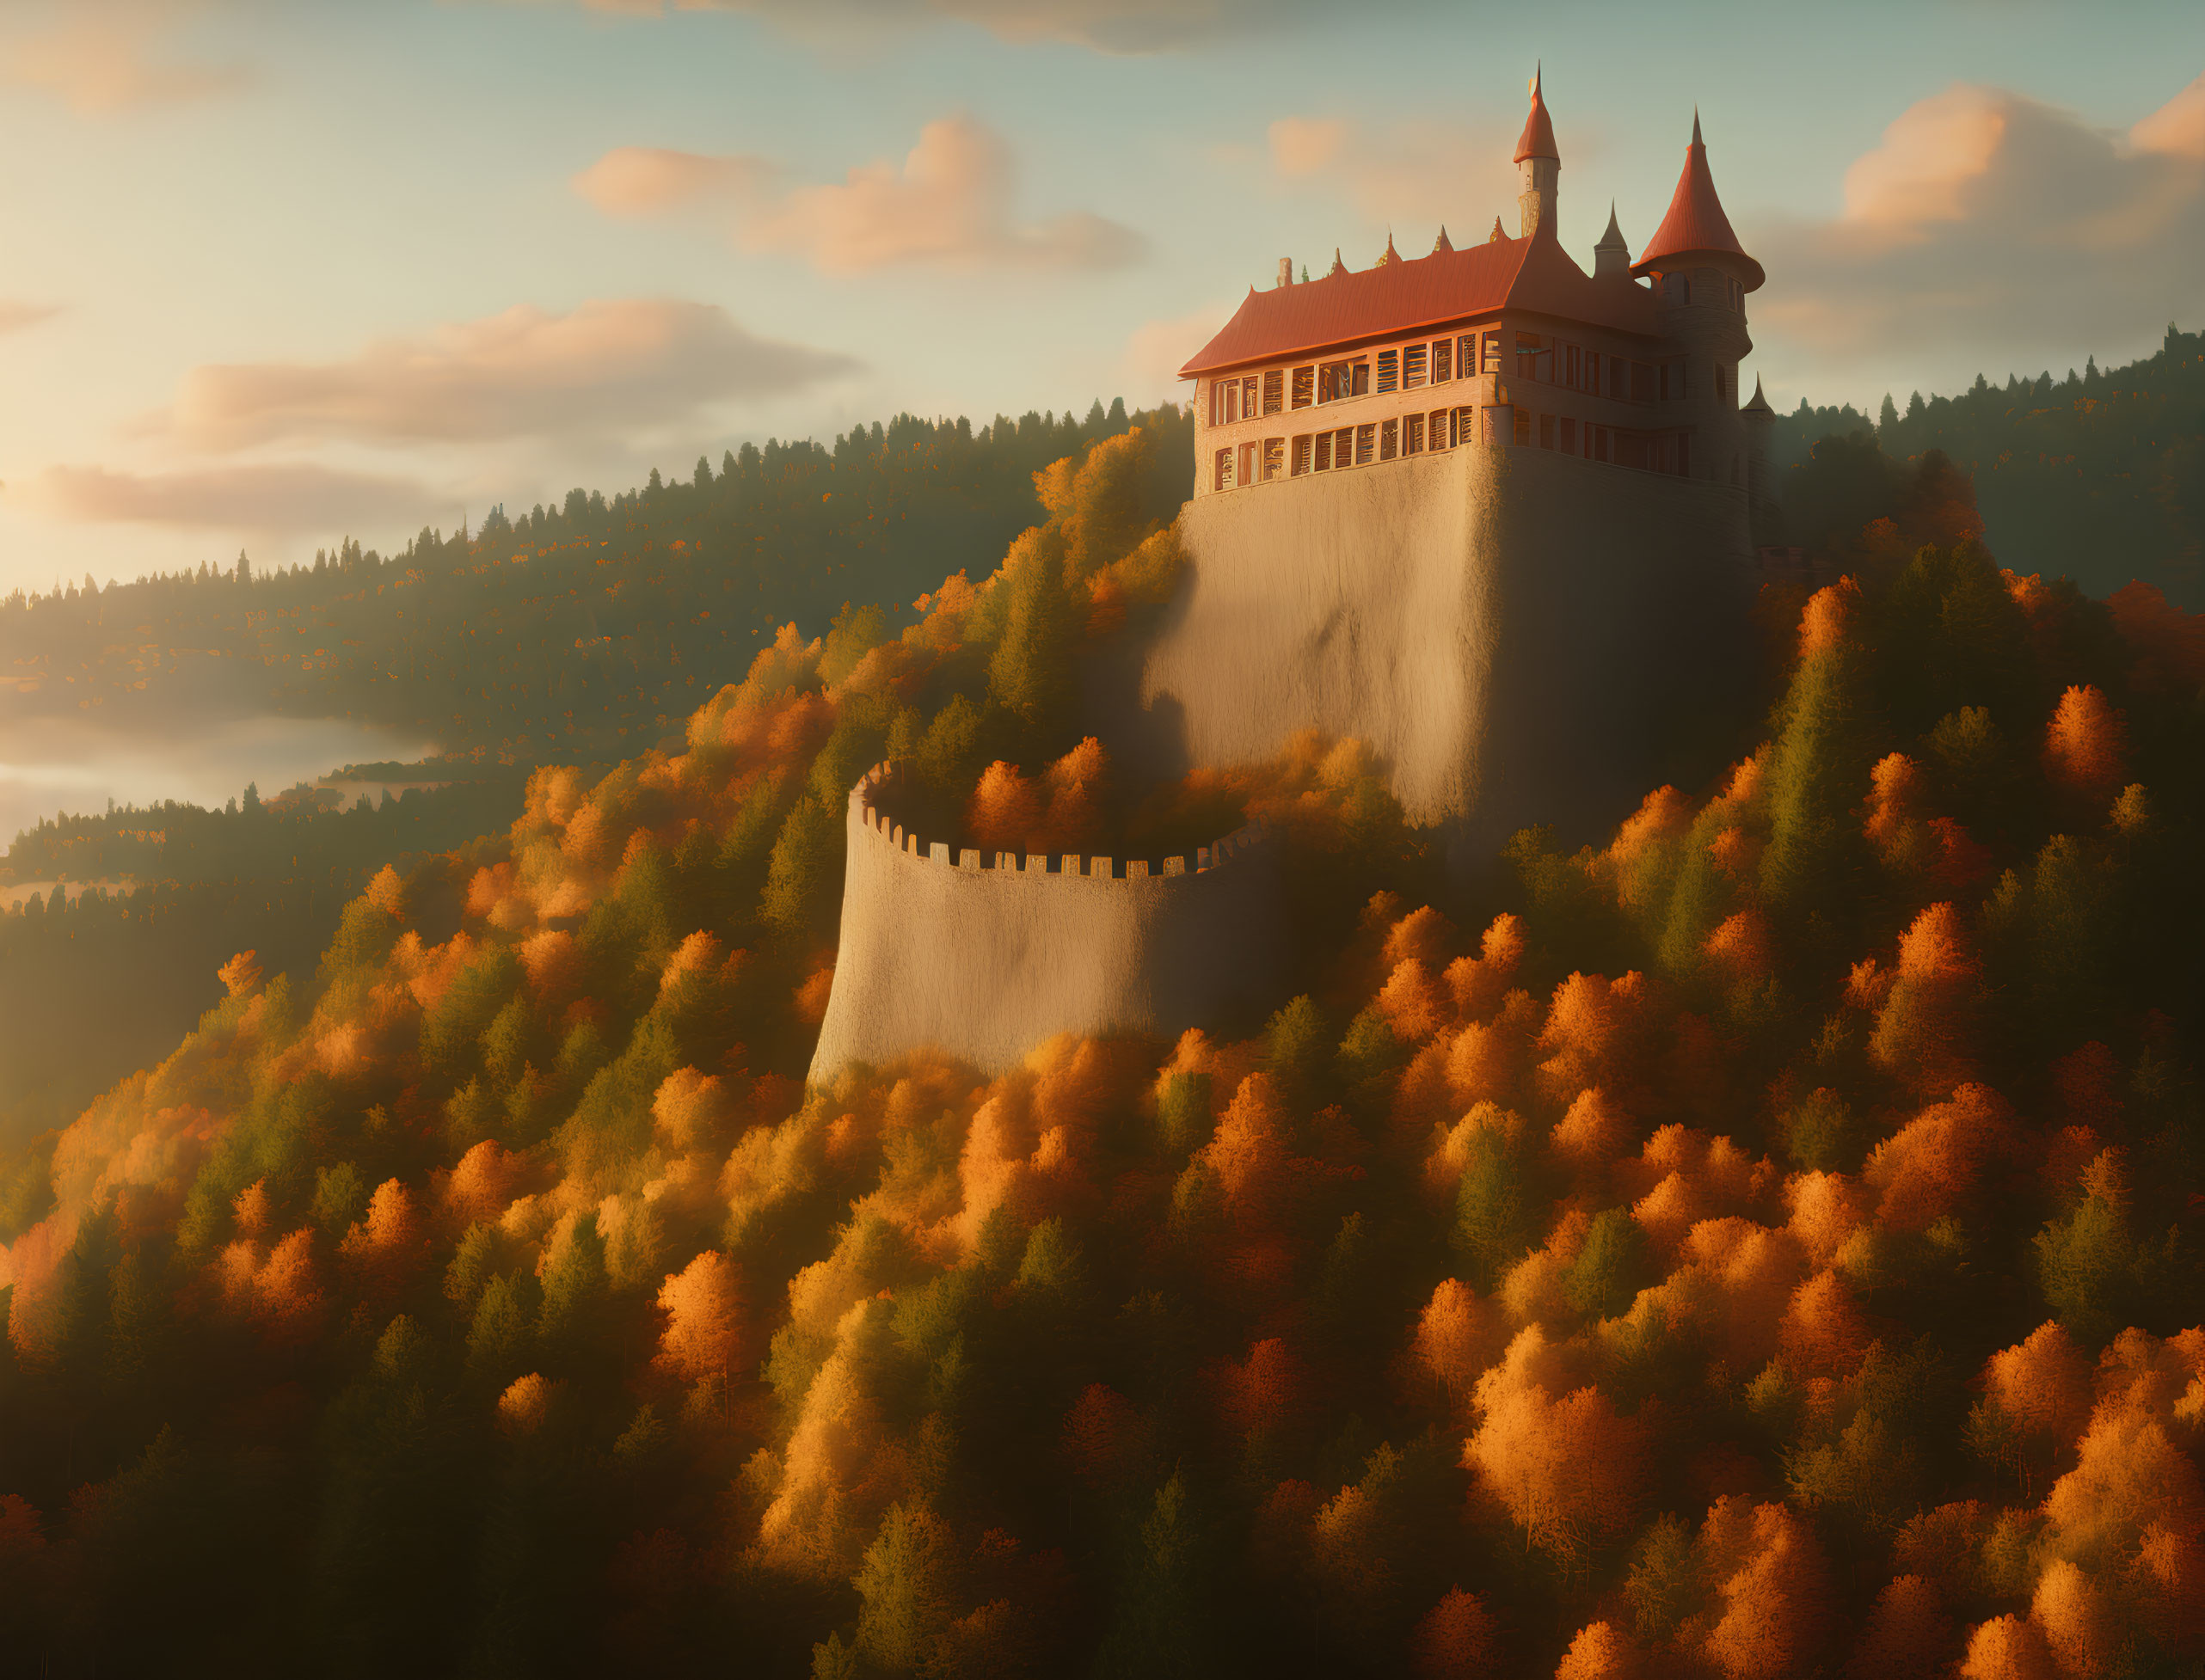 Majestic castle on hill in autumn forest with golden light